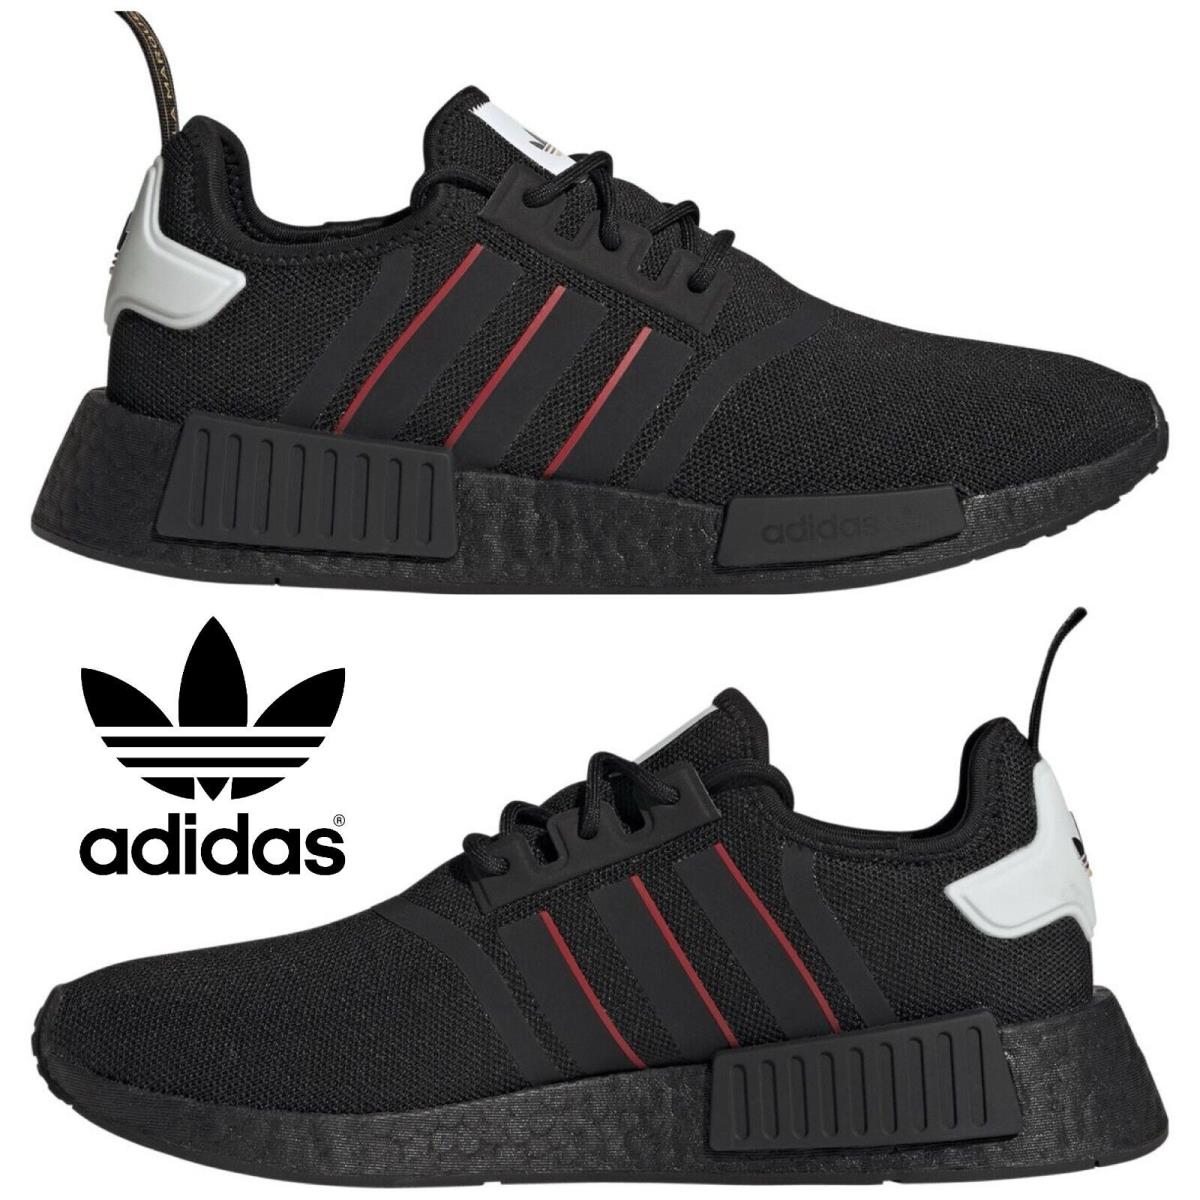 Adidas Originals Nmd R1 Men`s Sneakers Running Shoes Gym Casual Sport Black Red - Black, Manufacturer: Black/Red